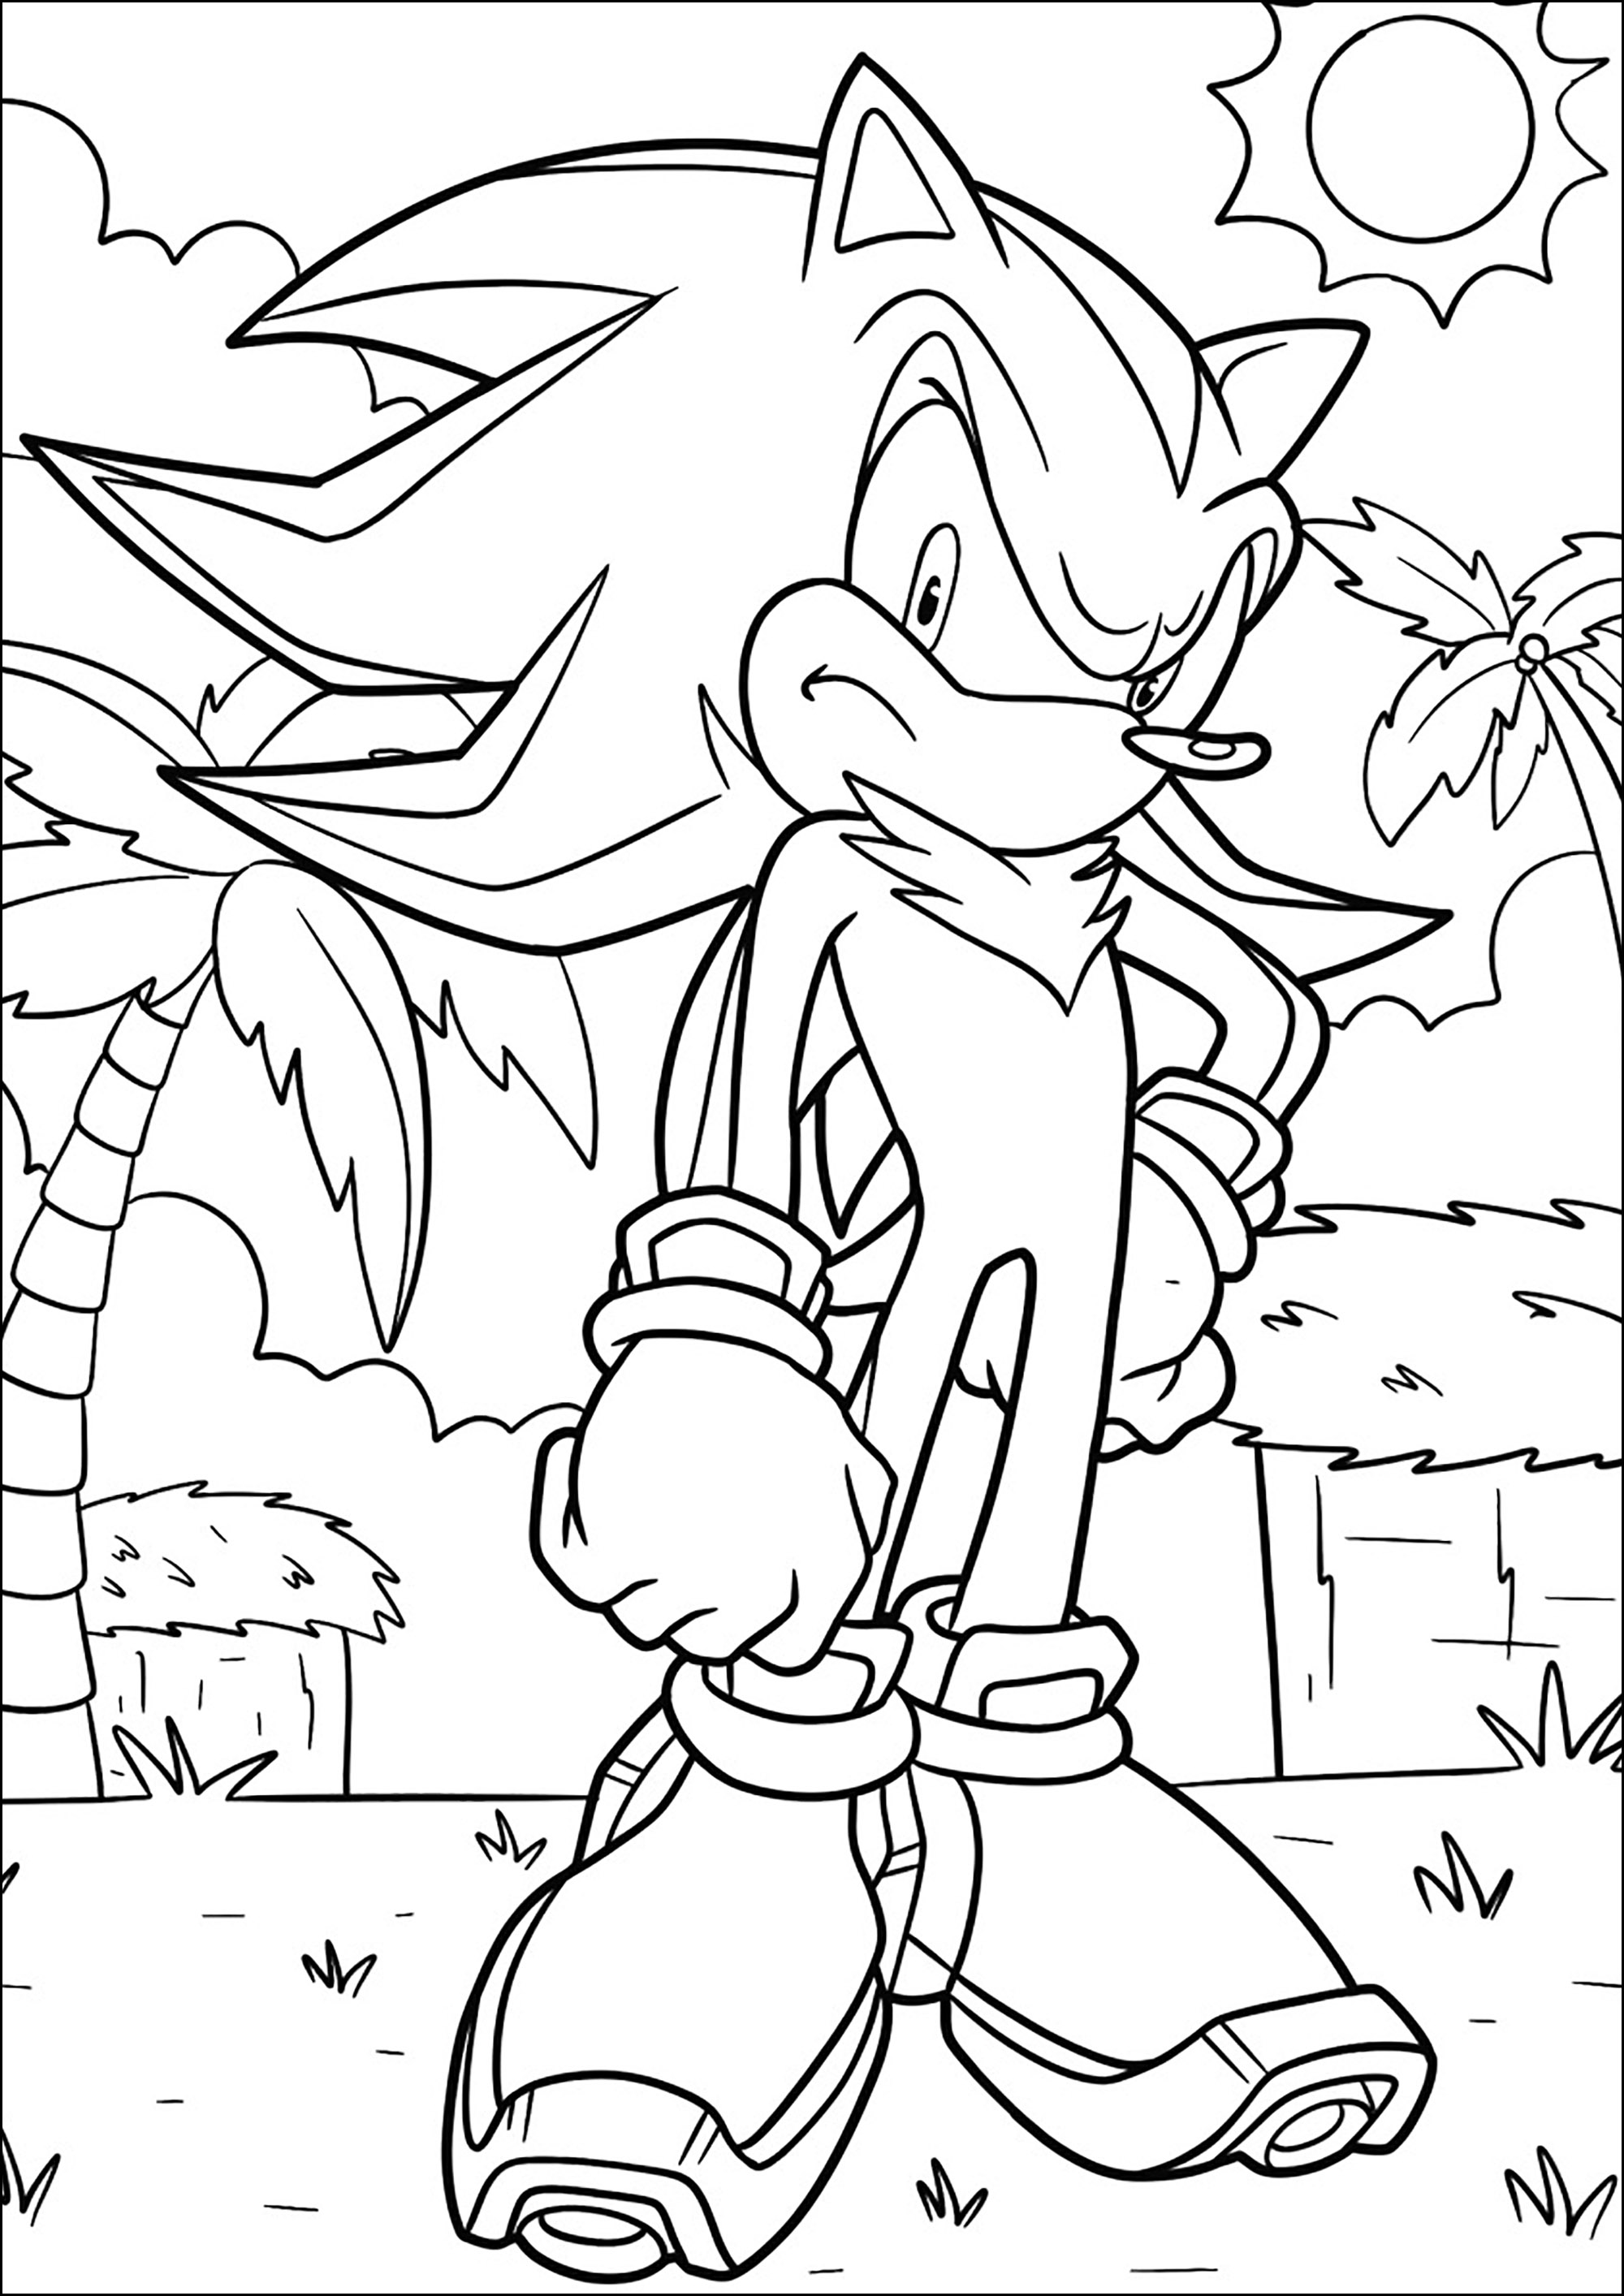 Simple Sonic coloring page for children